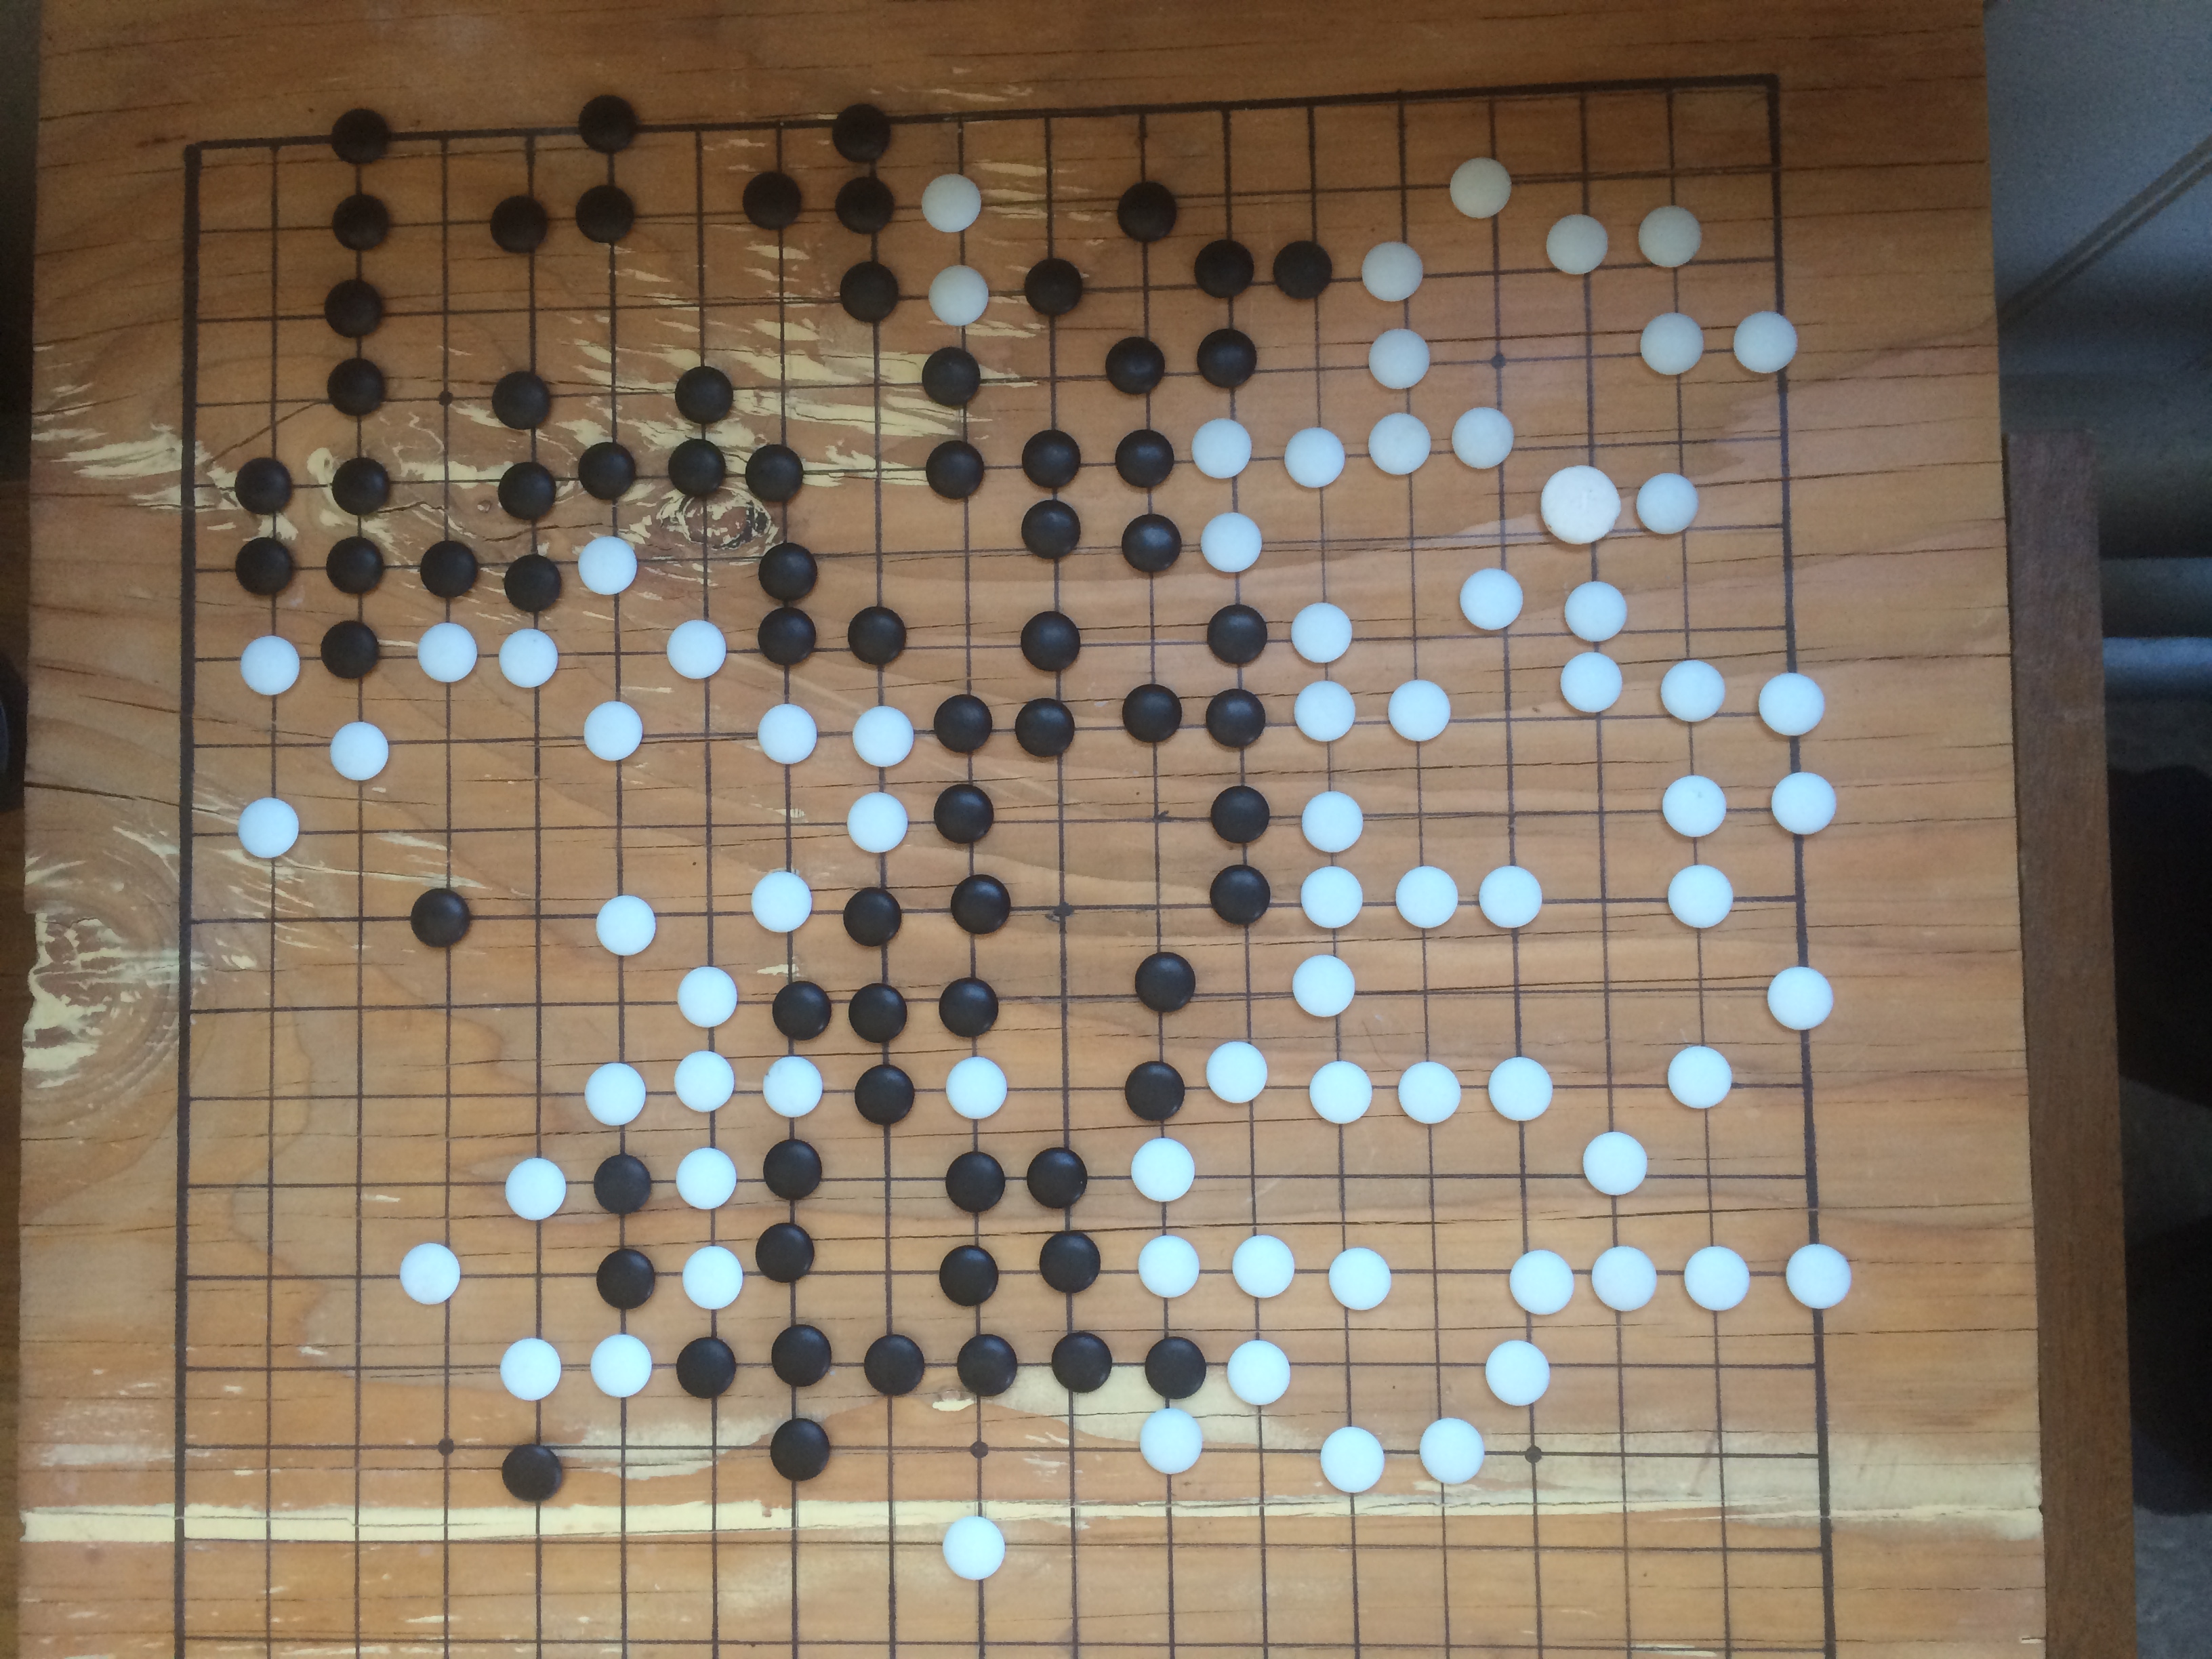 A recent game of Go: James-White and Eddie - Black